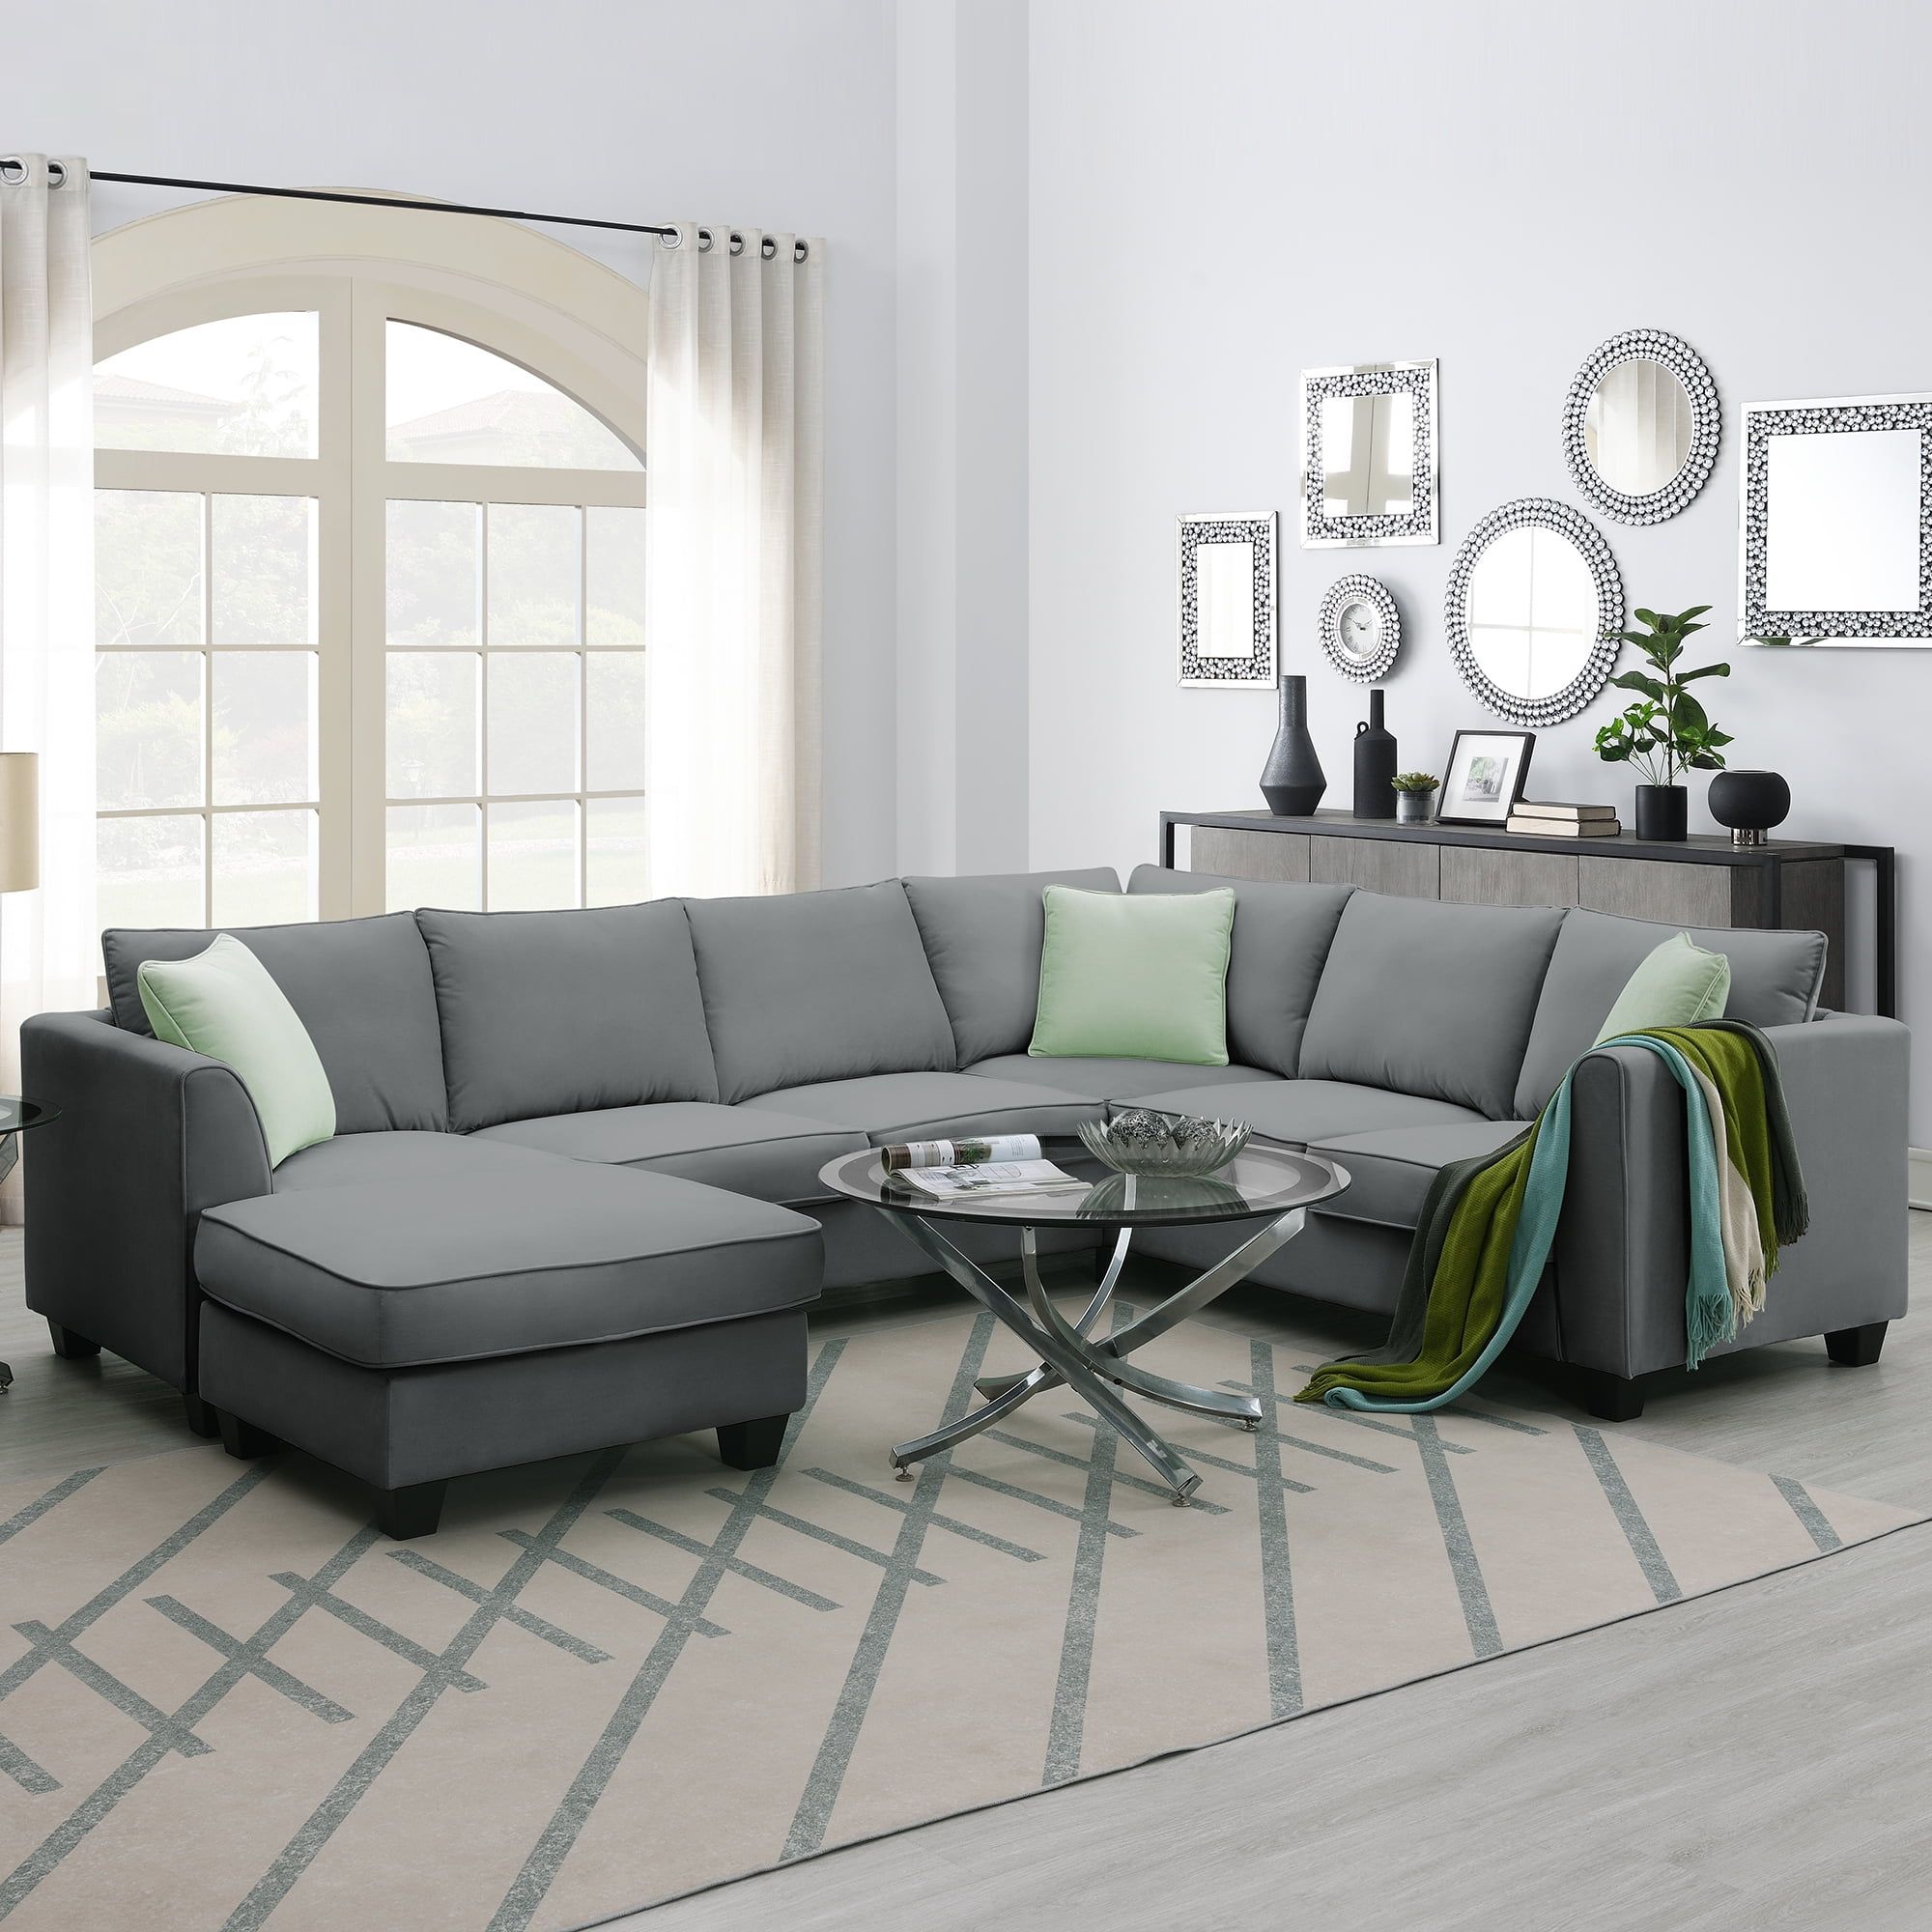 7 Seats Modular Sectional Sofa With Ottoman, L Shape Fabric Sofa Corner  Couch Set Living Room Couches Sets With 3 Pillows, Gray, 112" X 87" –  Walmart Throughout Microfiber Sectional Corner Sofas (View 4 of 15)